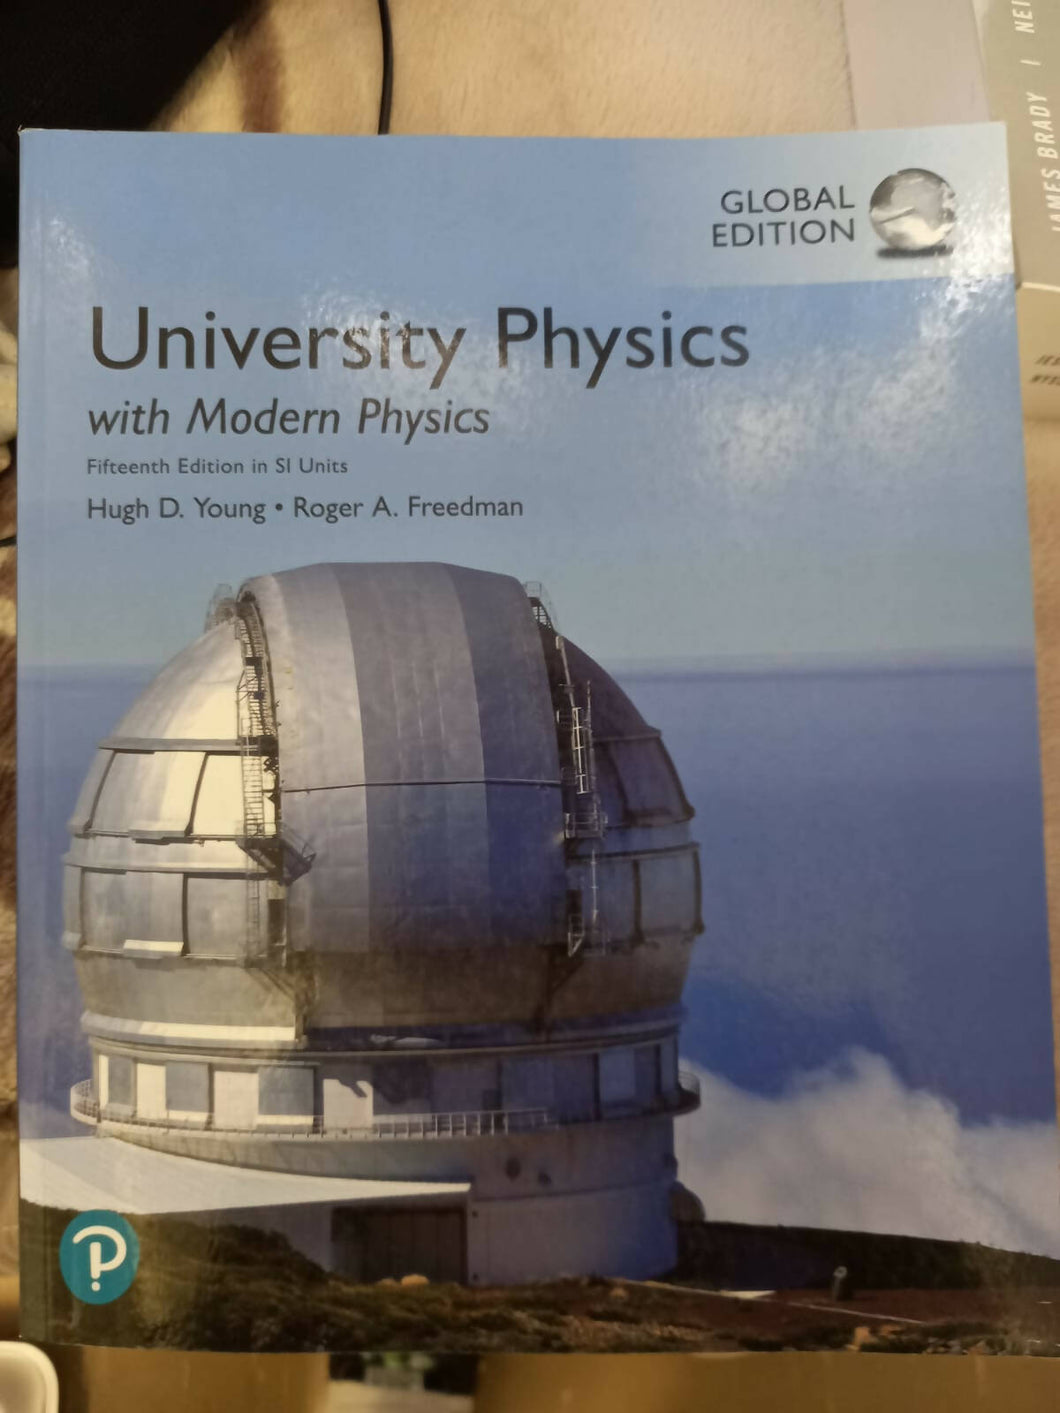 University physics with modern physics Fifteenth edition in SI Units